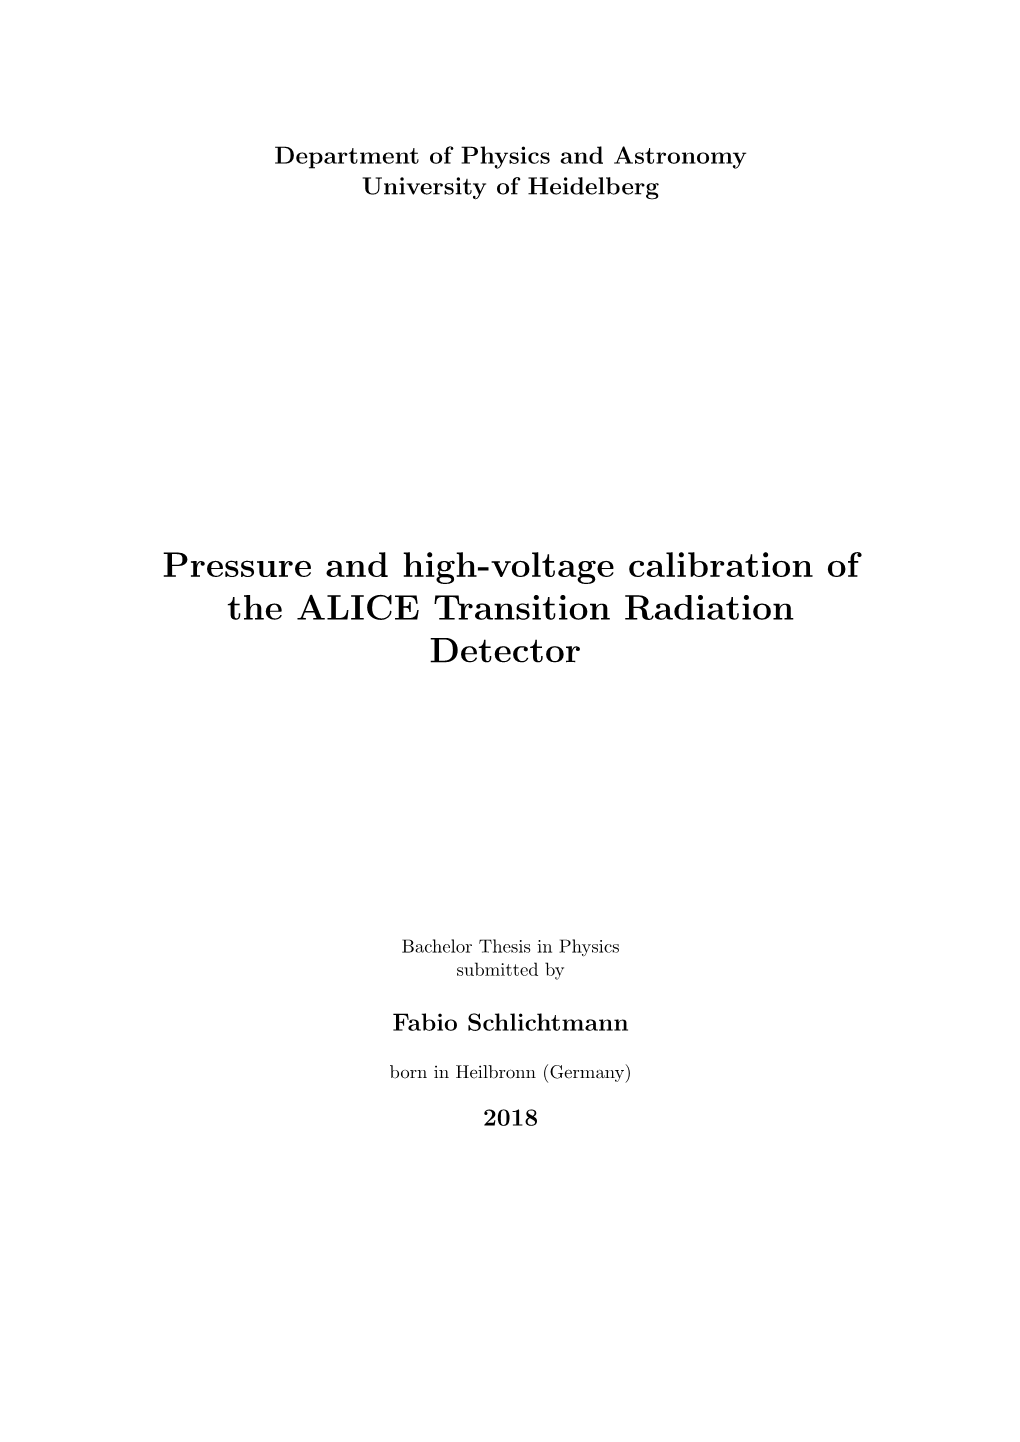 Pressure and High-Voltage Calibration of the ALICE Transition Radiation Detector